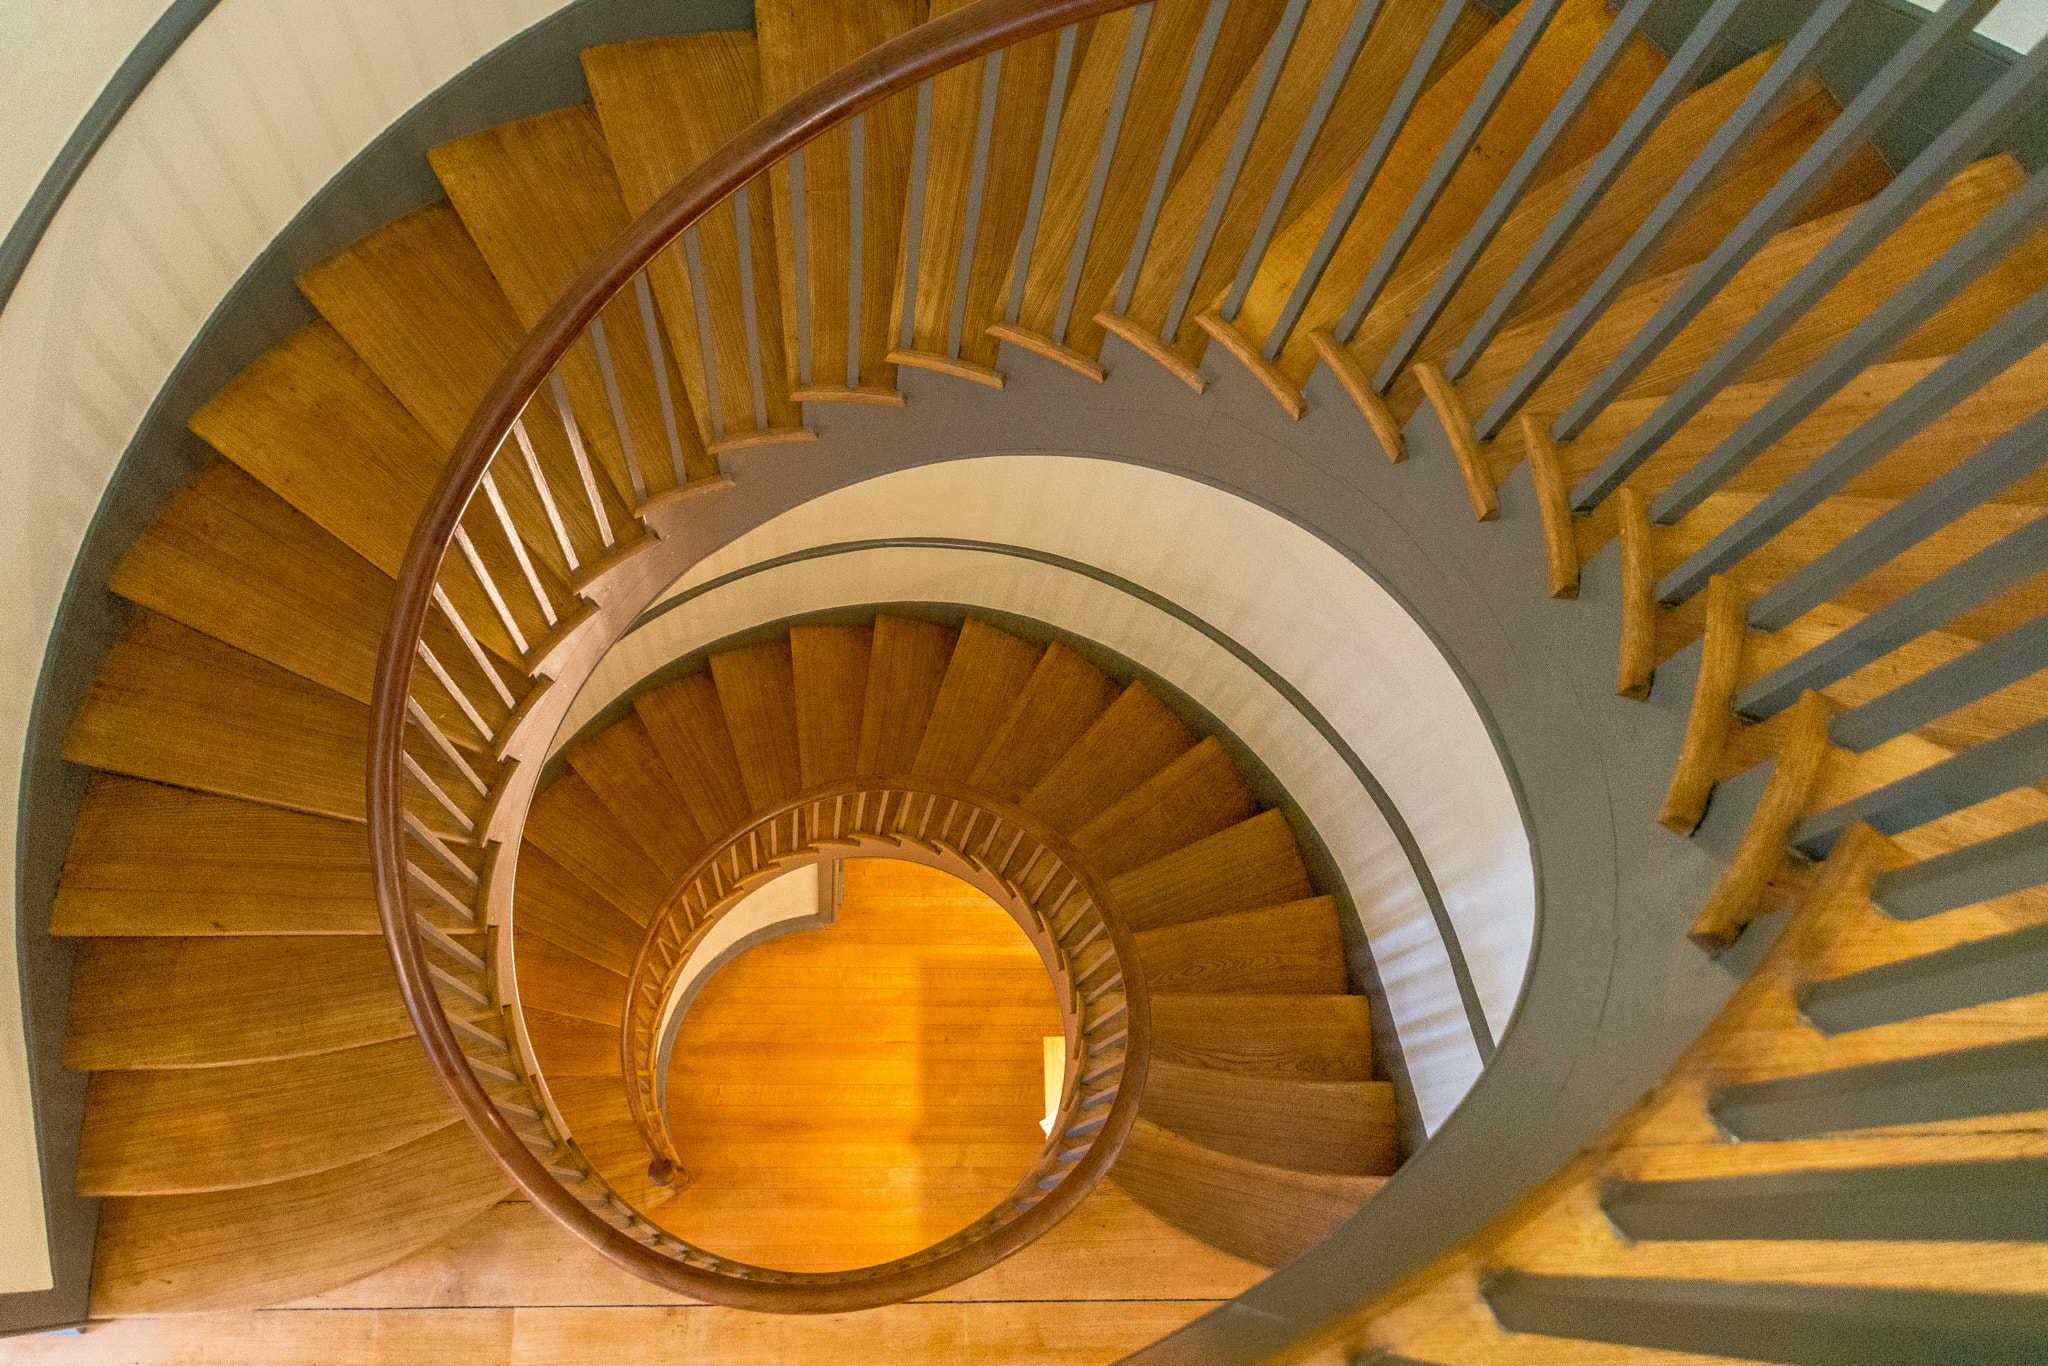 Nikon D7200 sample photo. The inviting spiral of the heavenly staircase photography